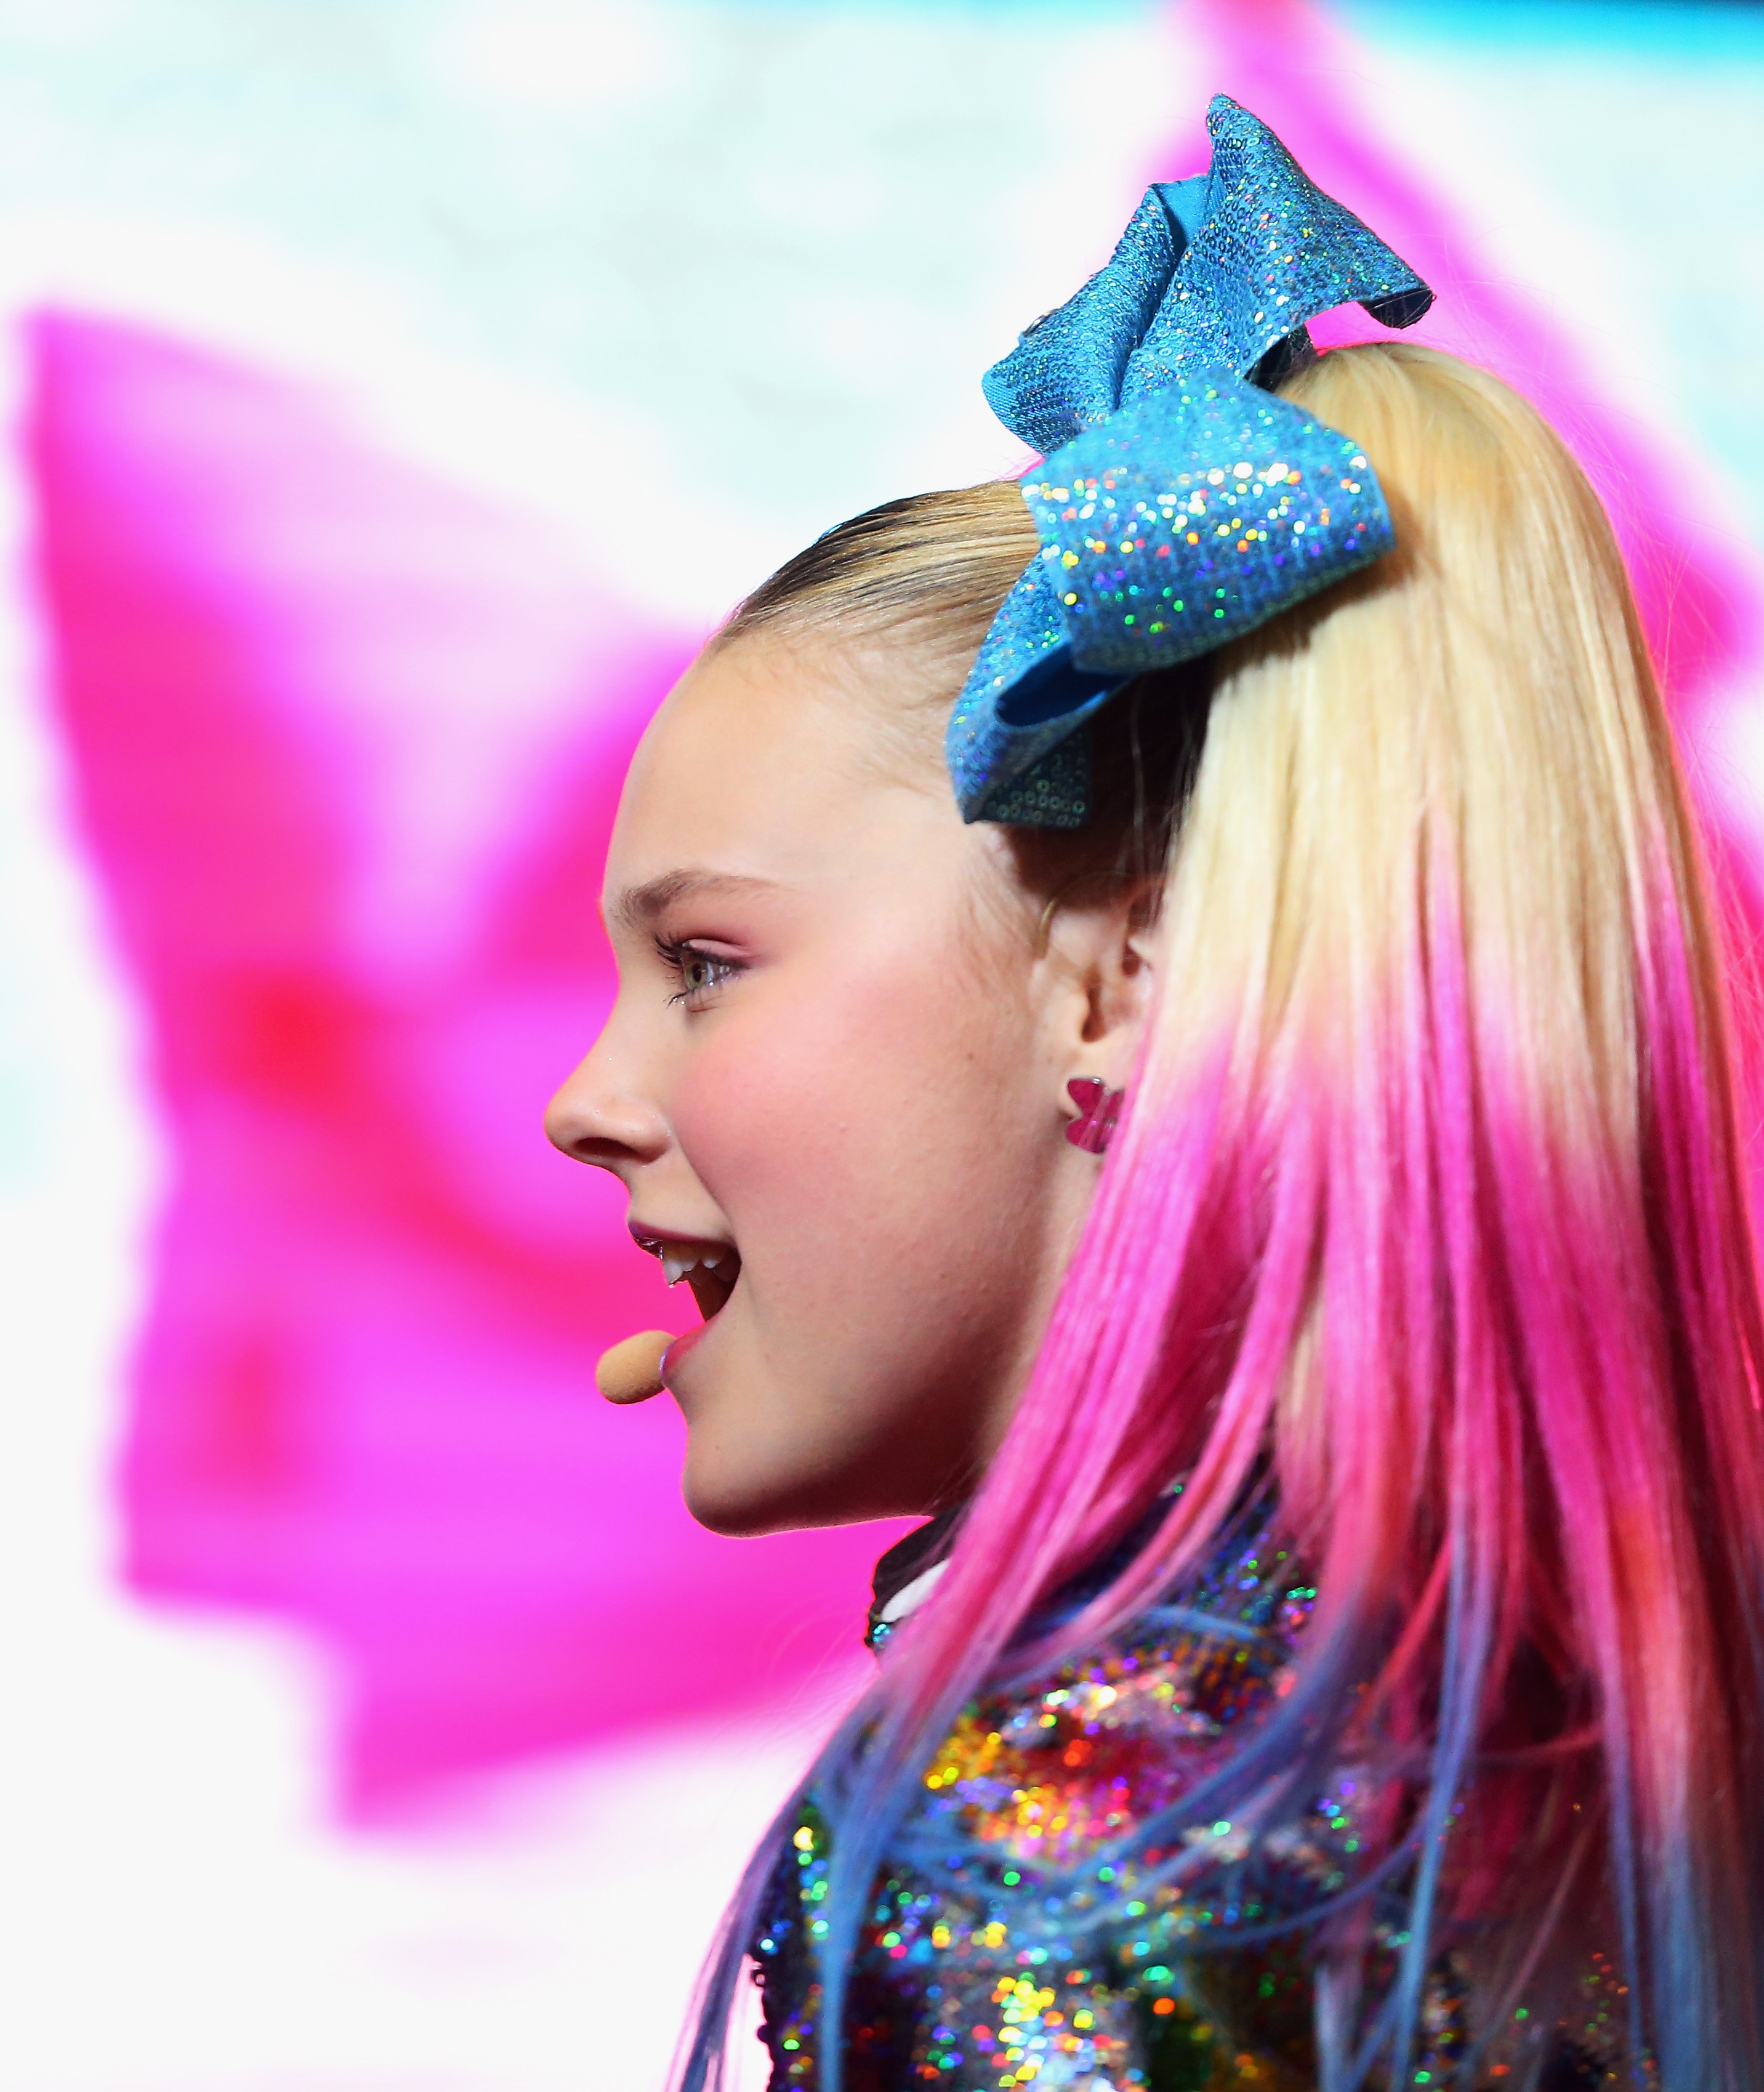 JoJo Siwa peforms live for fans at Westfield Parramatta on July 7, 2018